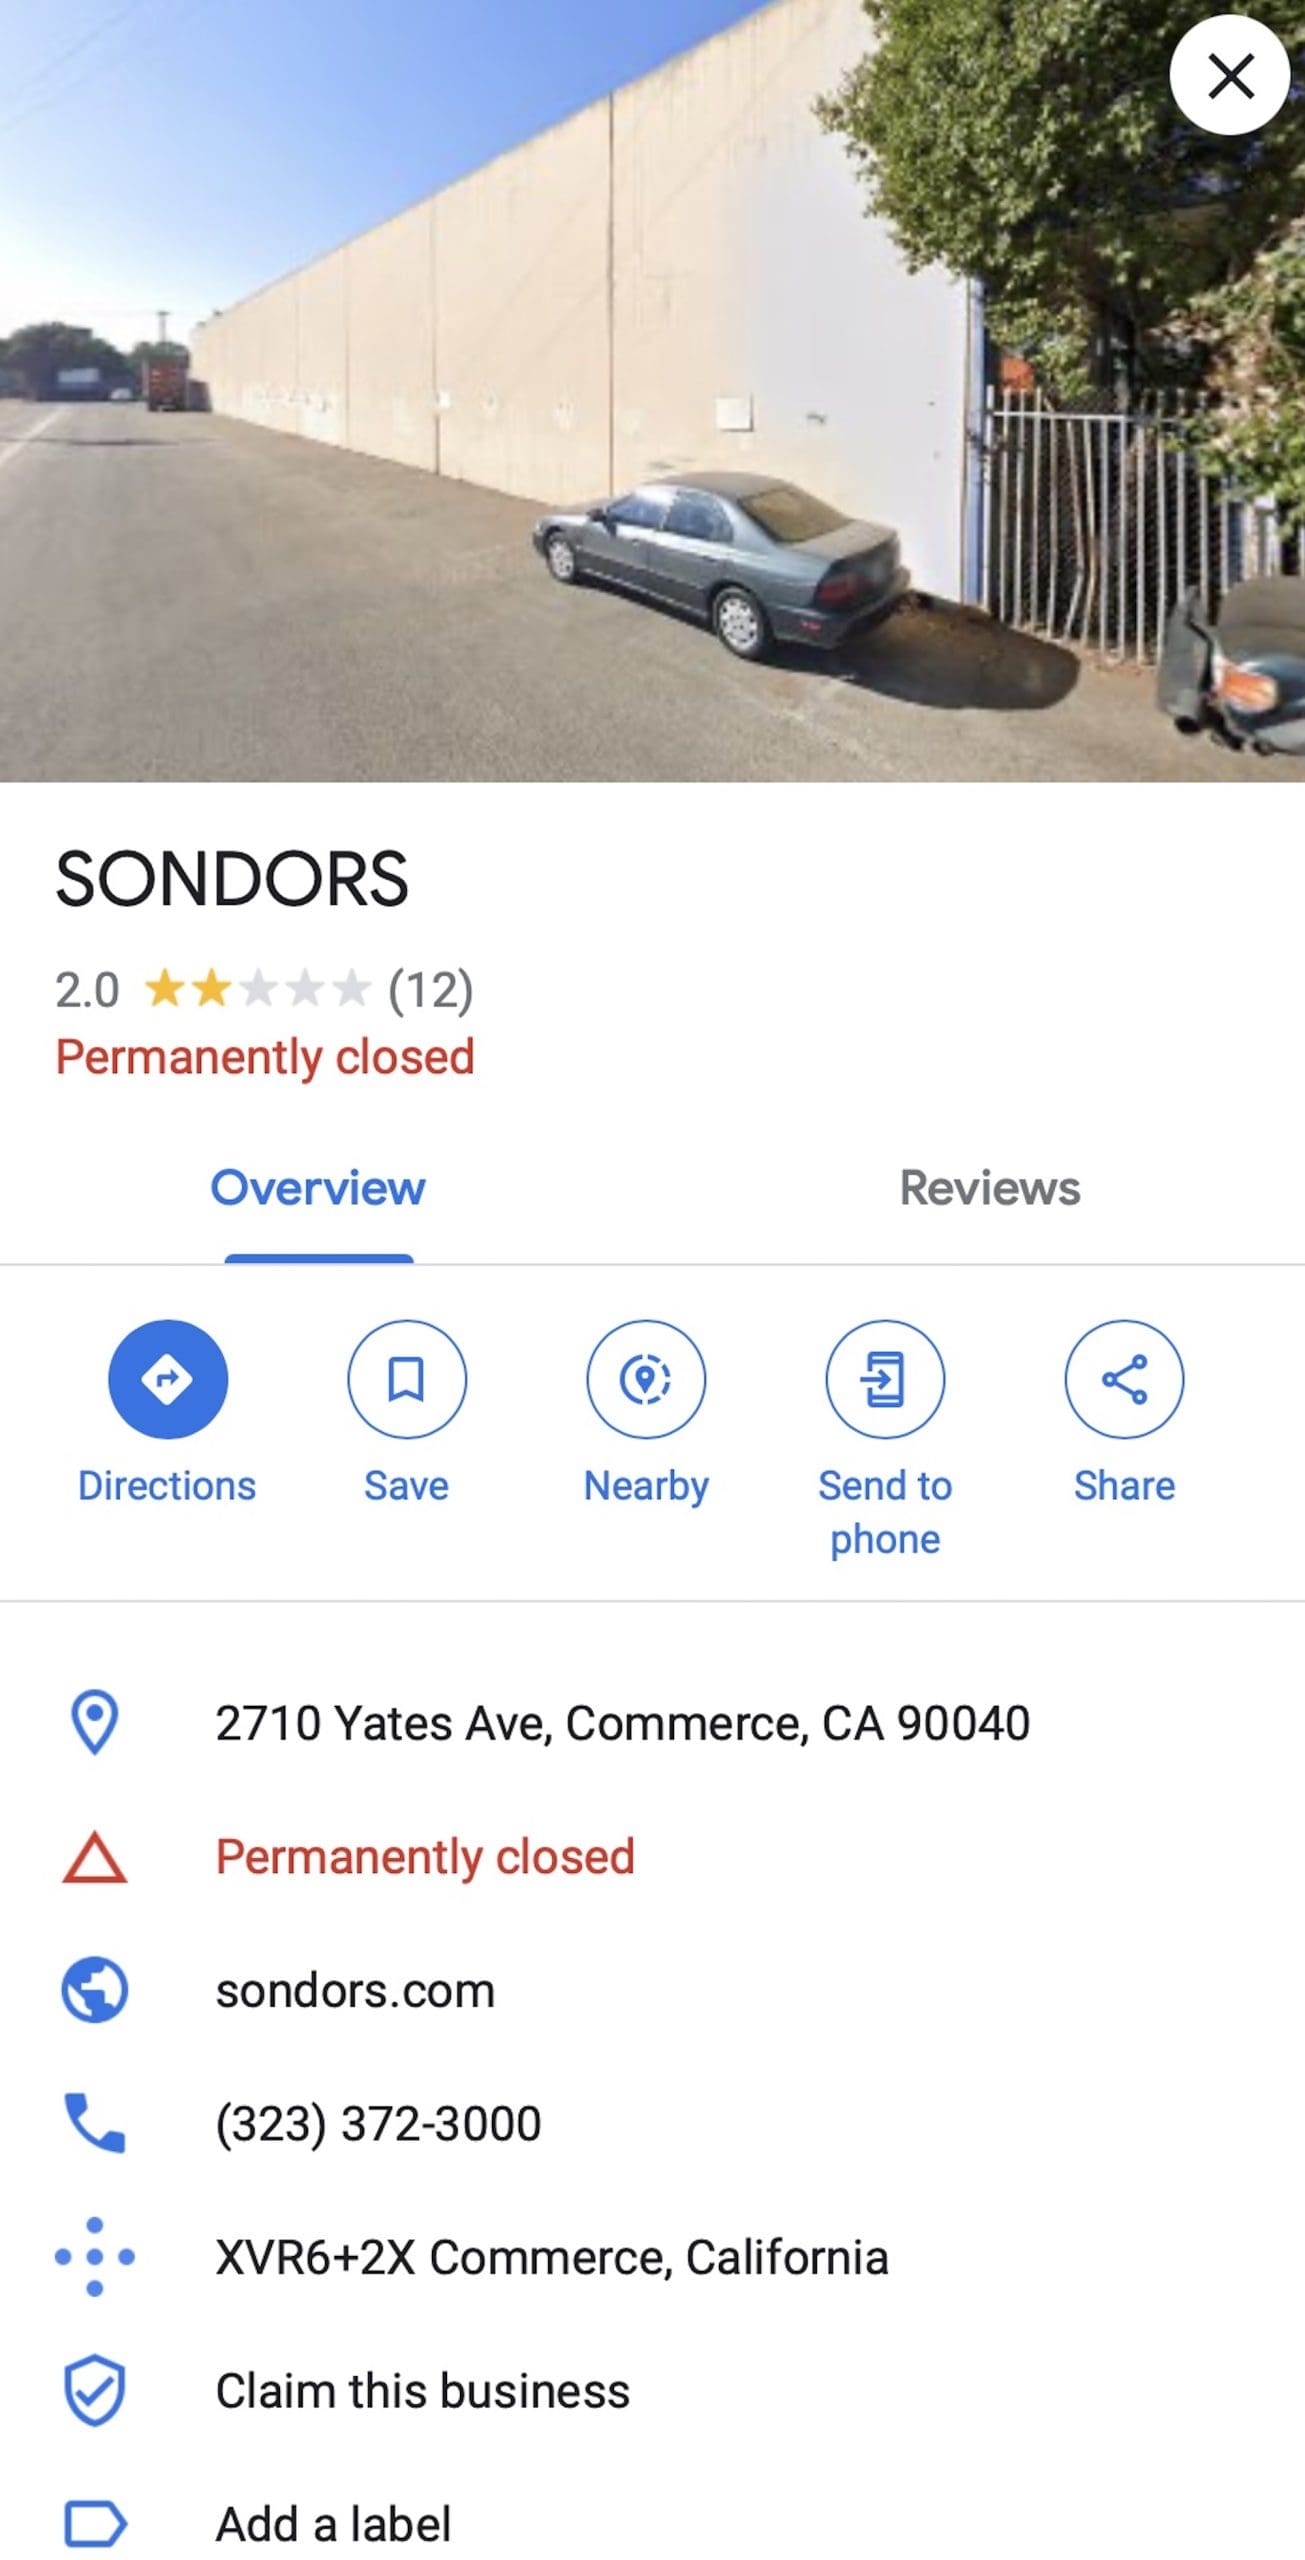 A view of Google Maps showing the SONDORS headquarters now permanently closed. Media sourced from Google Maps.